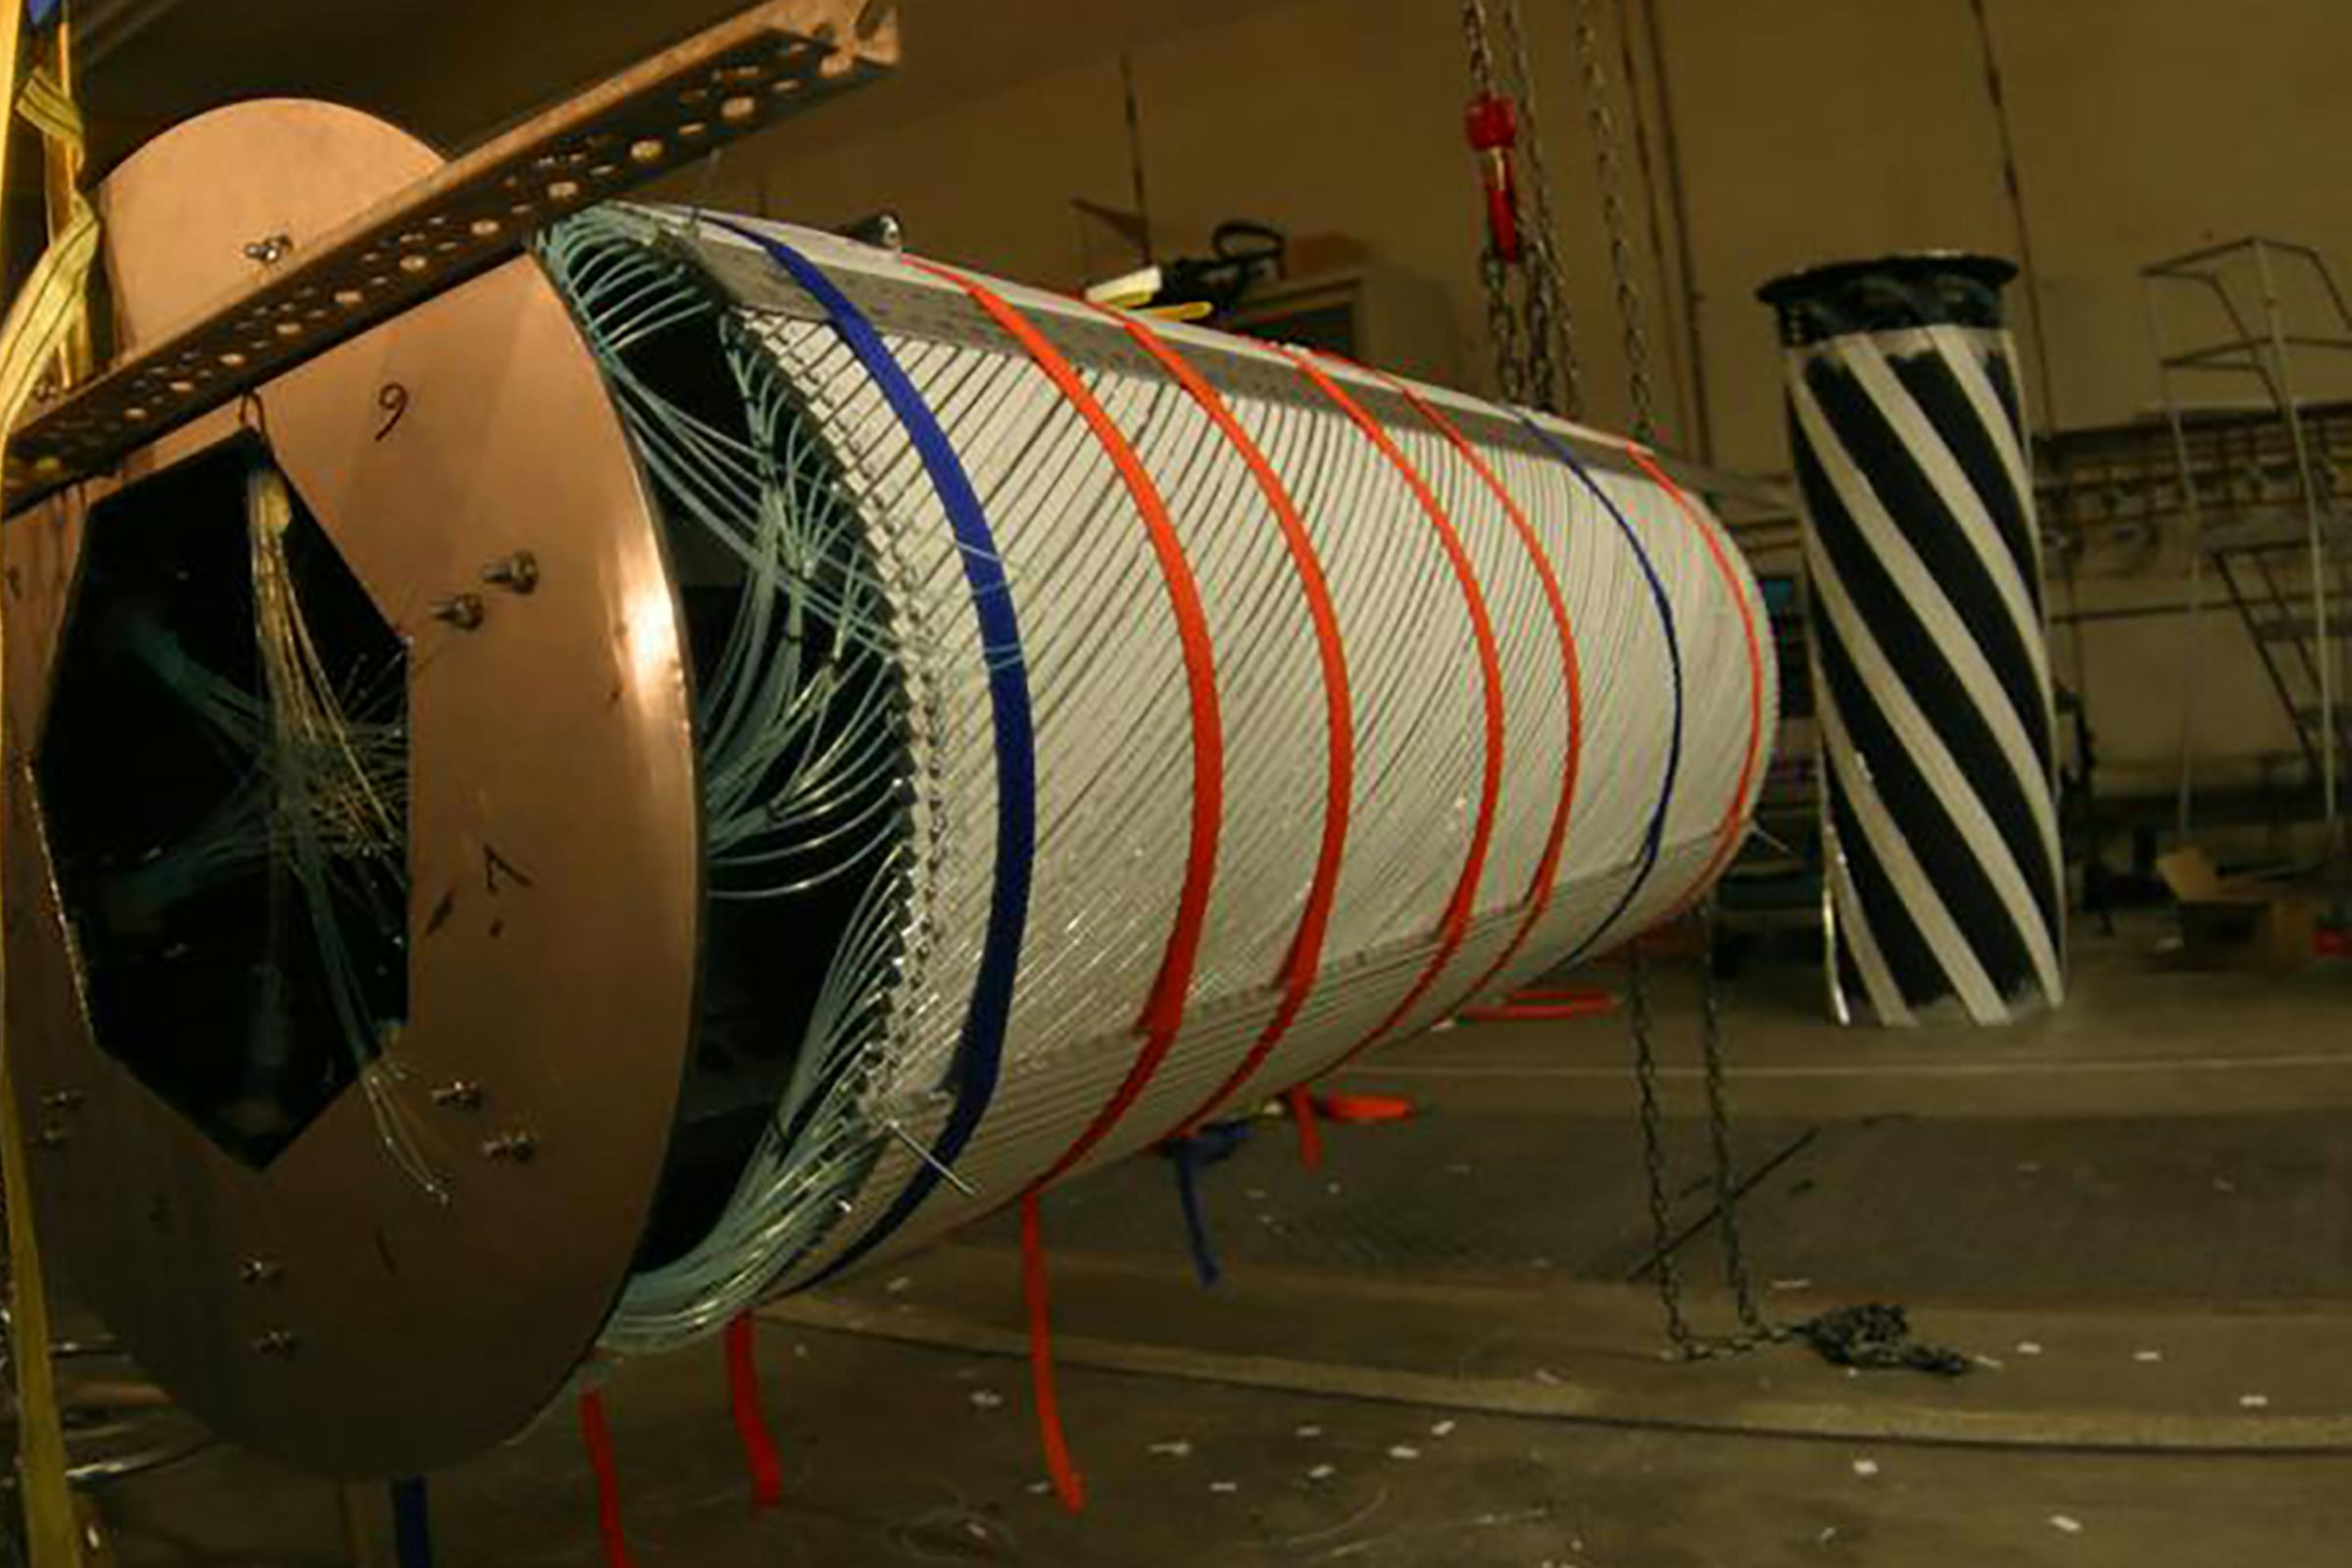 A large cylinder-shaped piece of scientific equipment hangs from chains